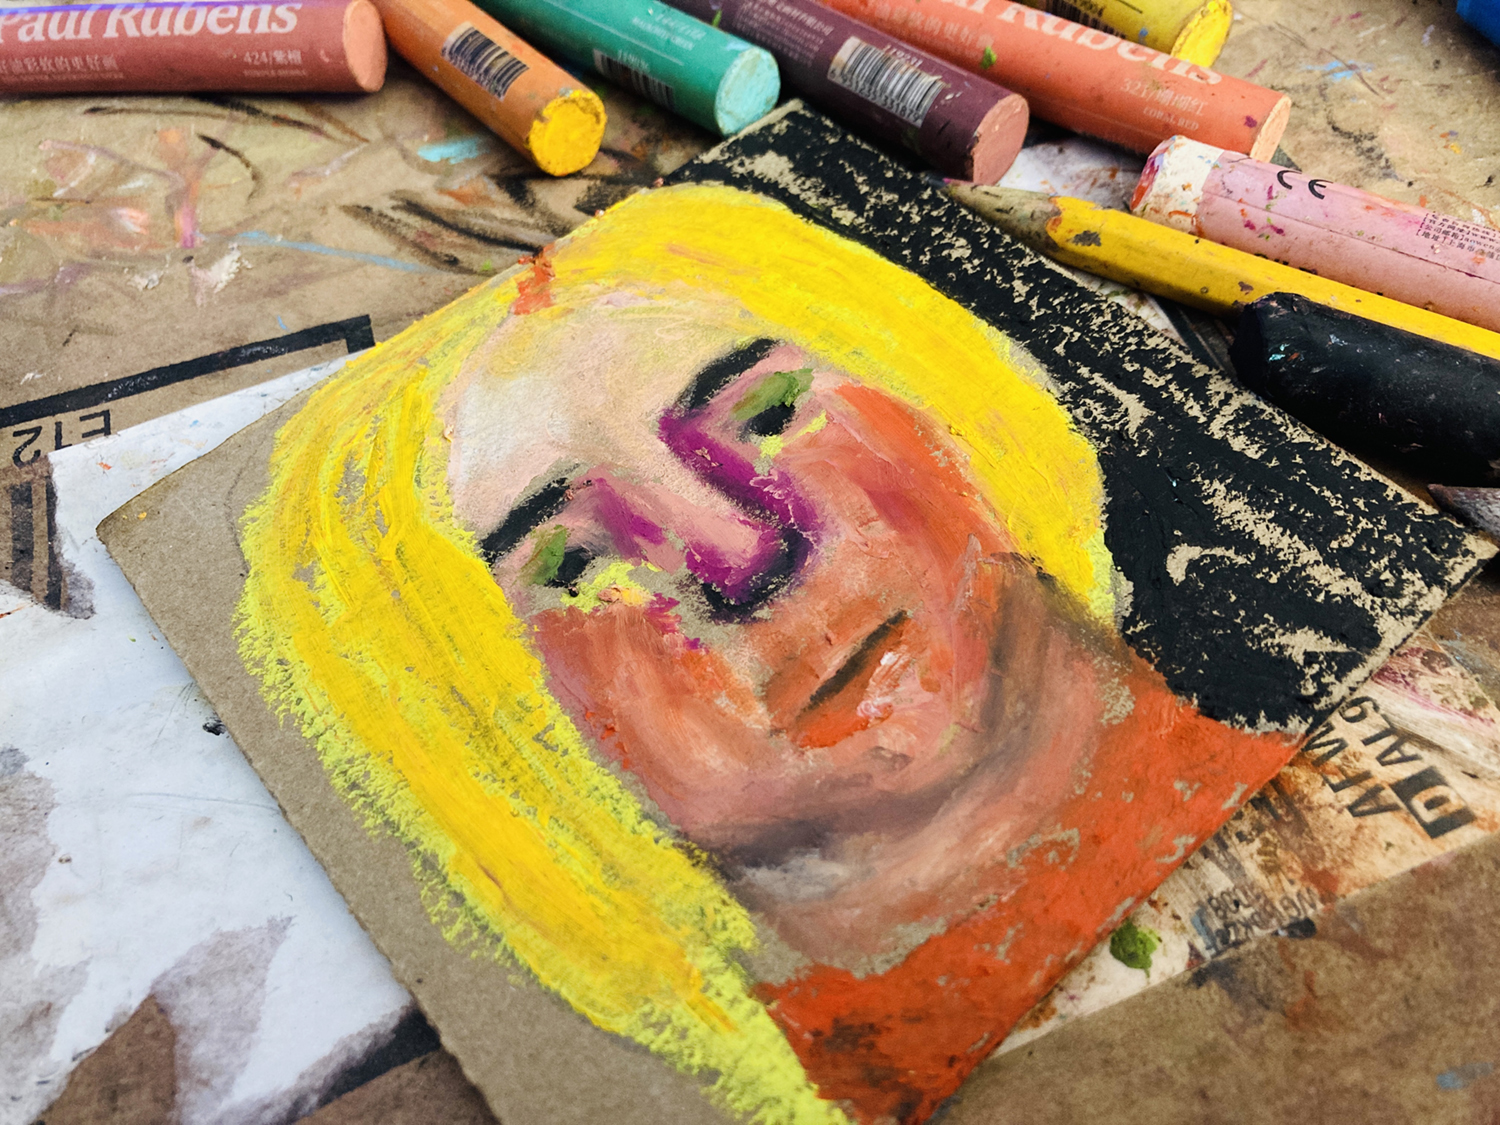 Drawing portraits with Paul Rubens pastels for the first time – Katie  Jeanne Wood